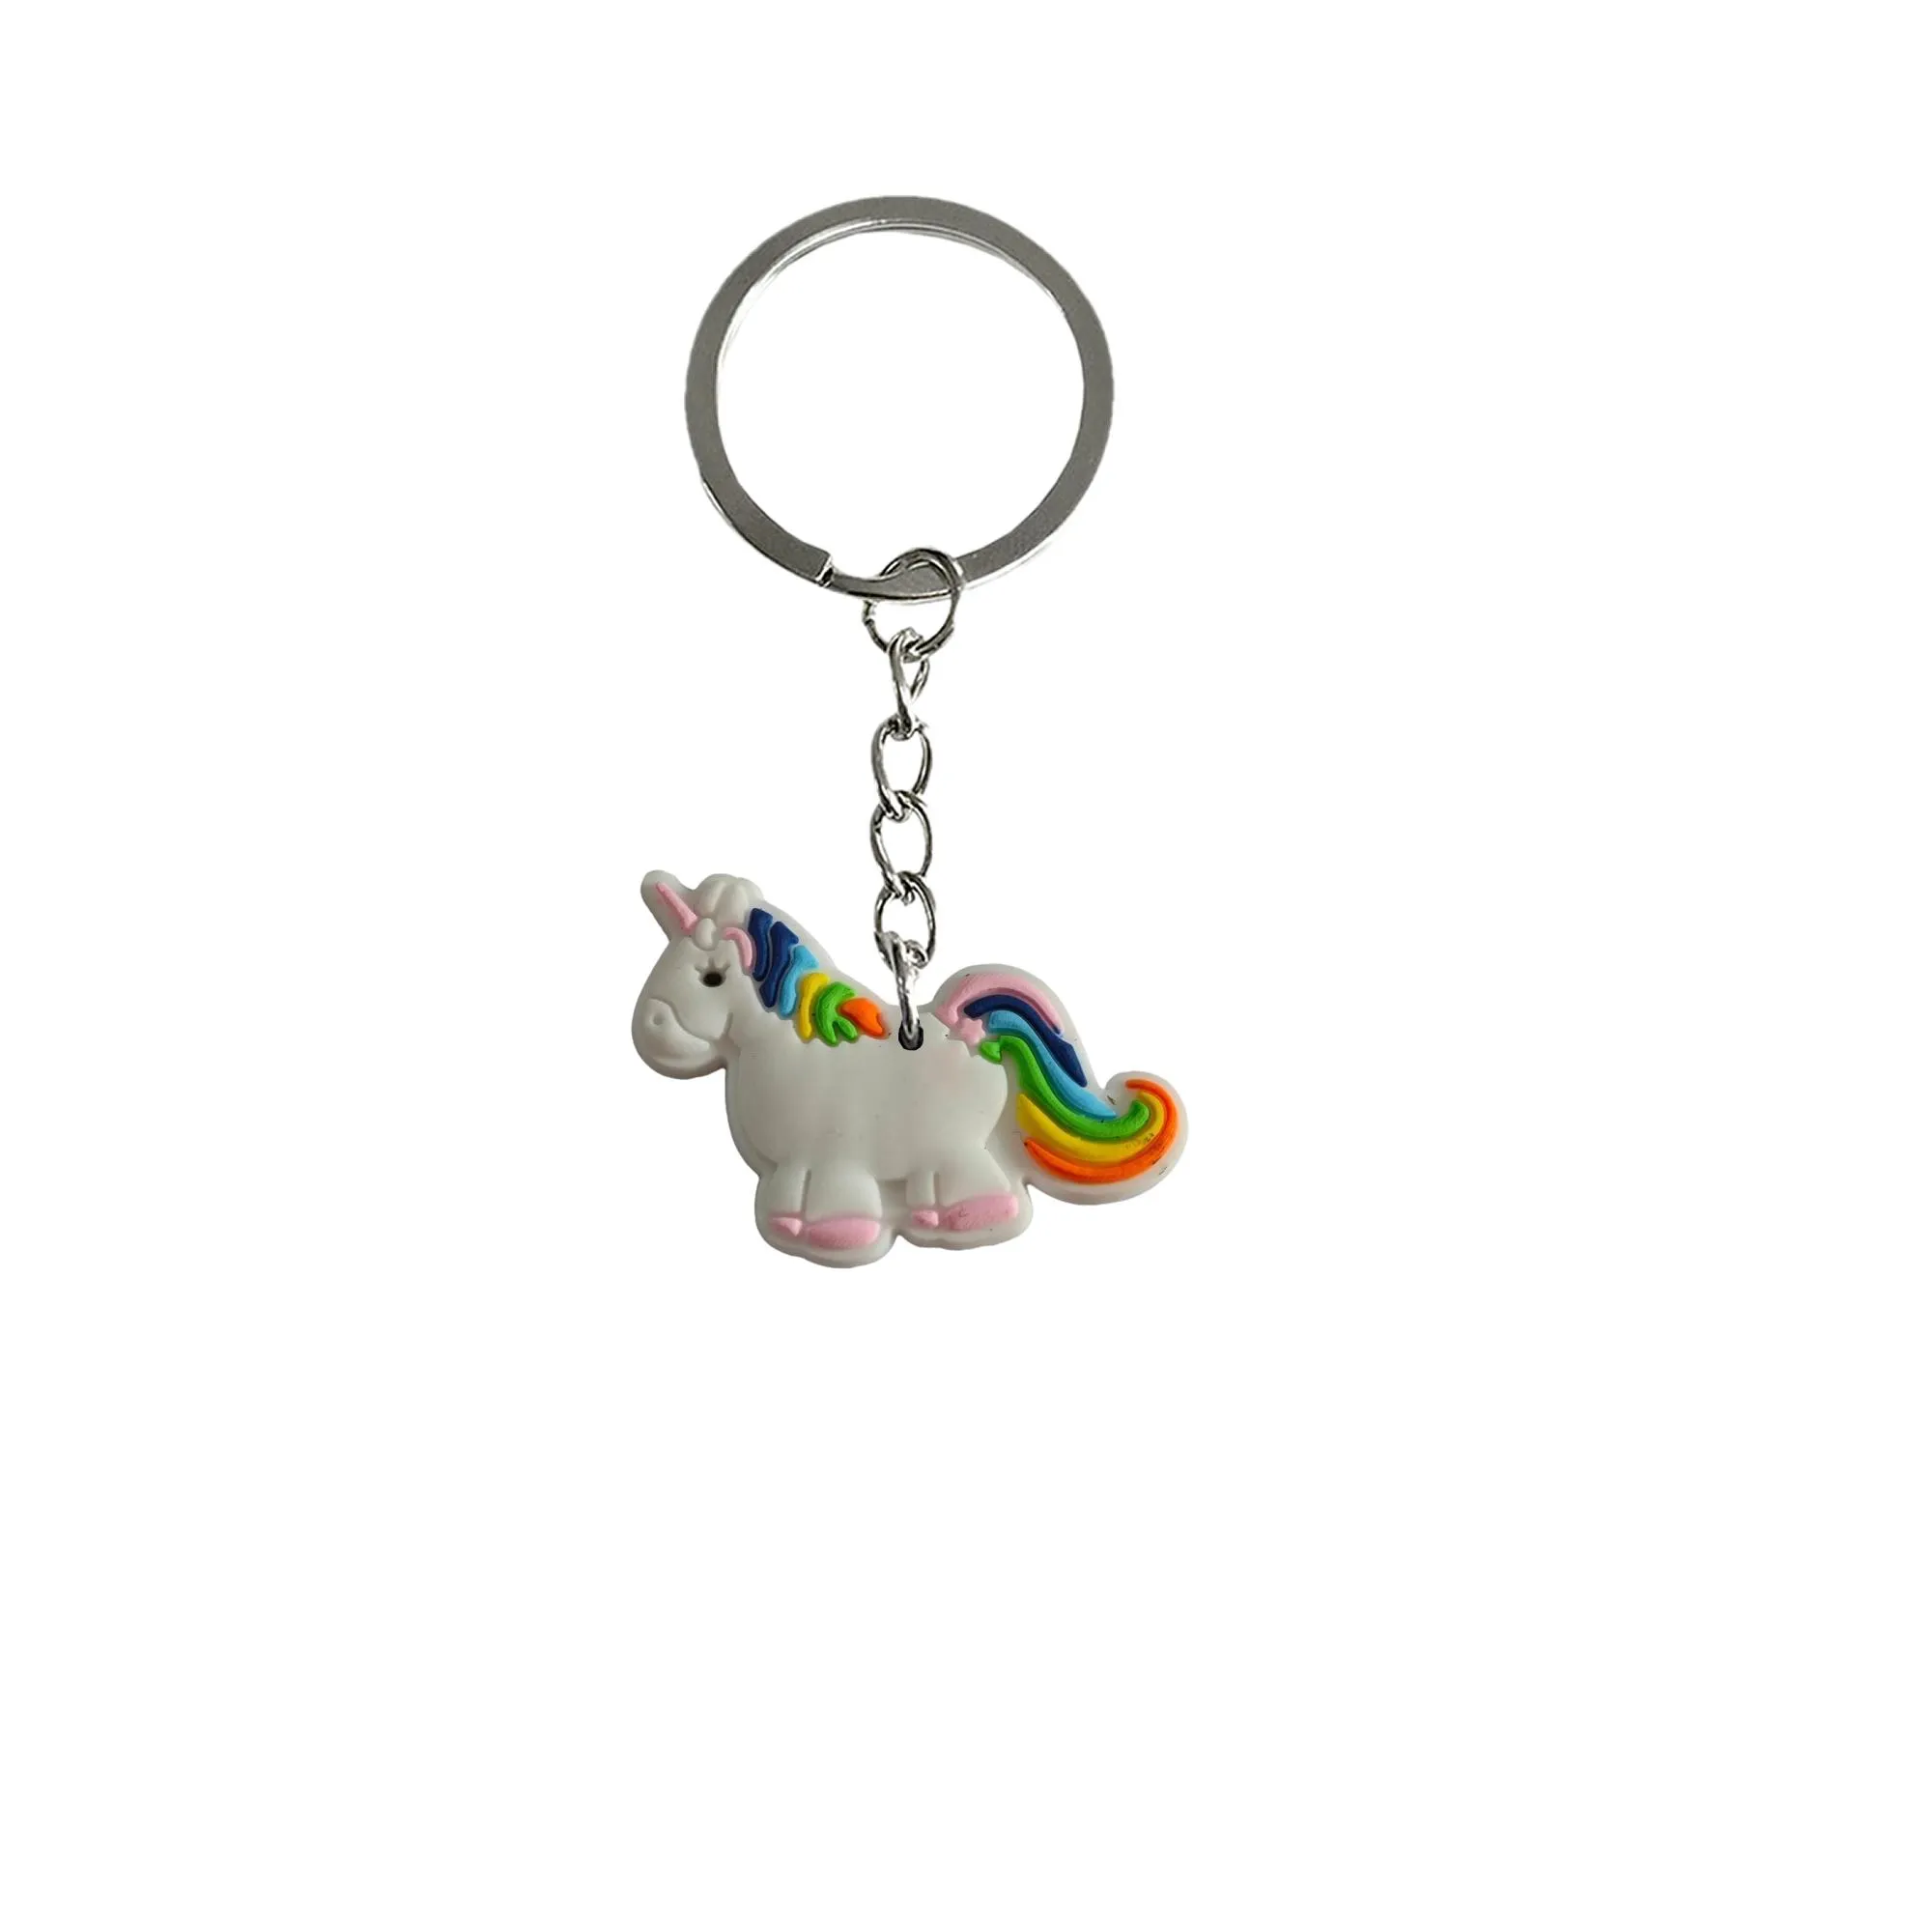 keychain for goodie bag stuffers supplies keyring backpacks key ring girls suitable schoolbag chain keyrings bags birthday christmas party favors gift